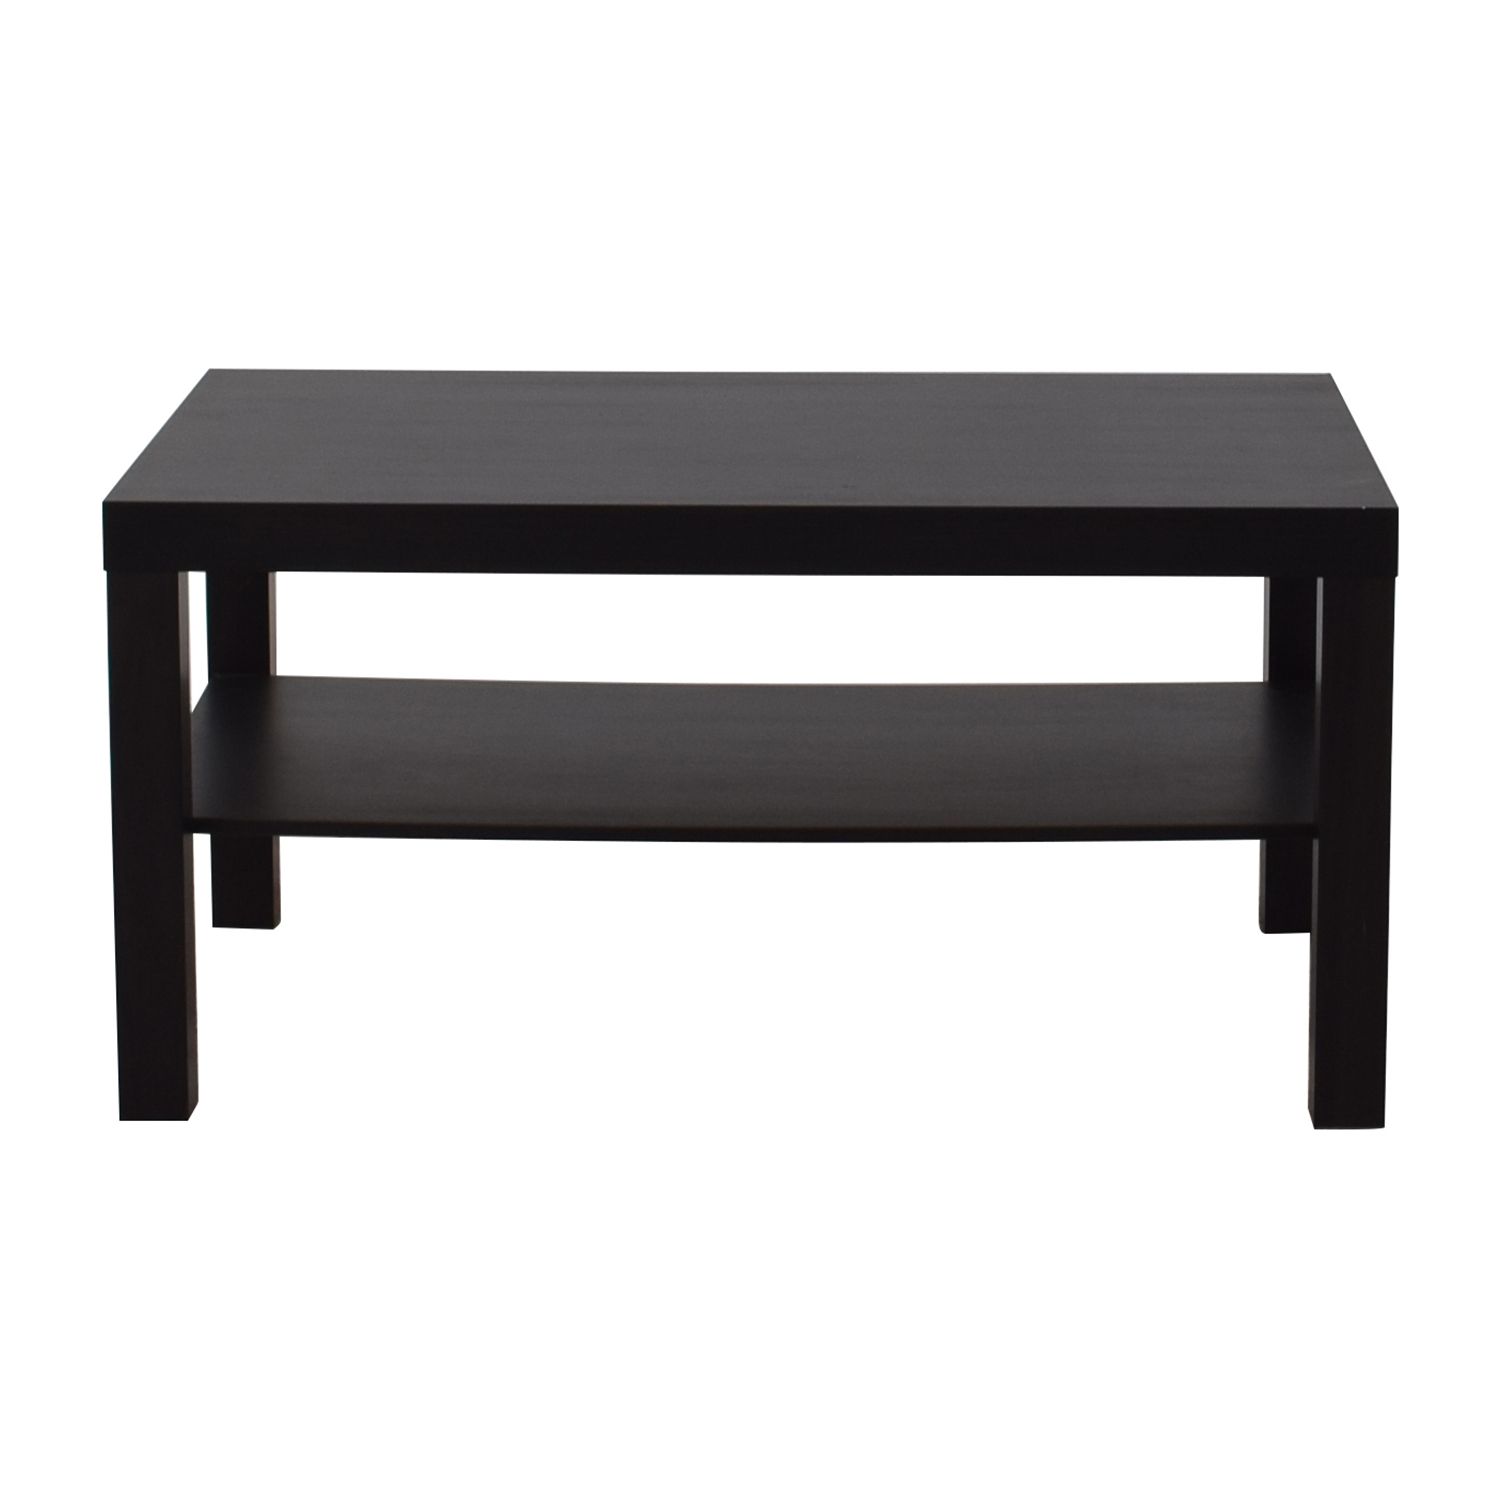 [%42% Off – Ikea Ikea Black Coffee Table / Tables Within Best And Newest Black And White Coffee Tables|black And White Coffee Tables Inside Famous 42% Off – Ikea Ikea Black Coffee Table / Tables|favorite Black And White Coffee Tables With Regard To 42% Off – Ikea Ikea Black Coffee Table / Tables|favorite 42% Off – Ikea Ikea Black Coffee Table / Tables With Regard To Black And White Coffee Tables%] (View 19 of 20)